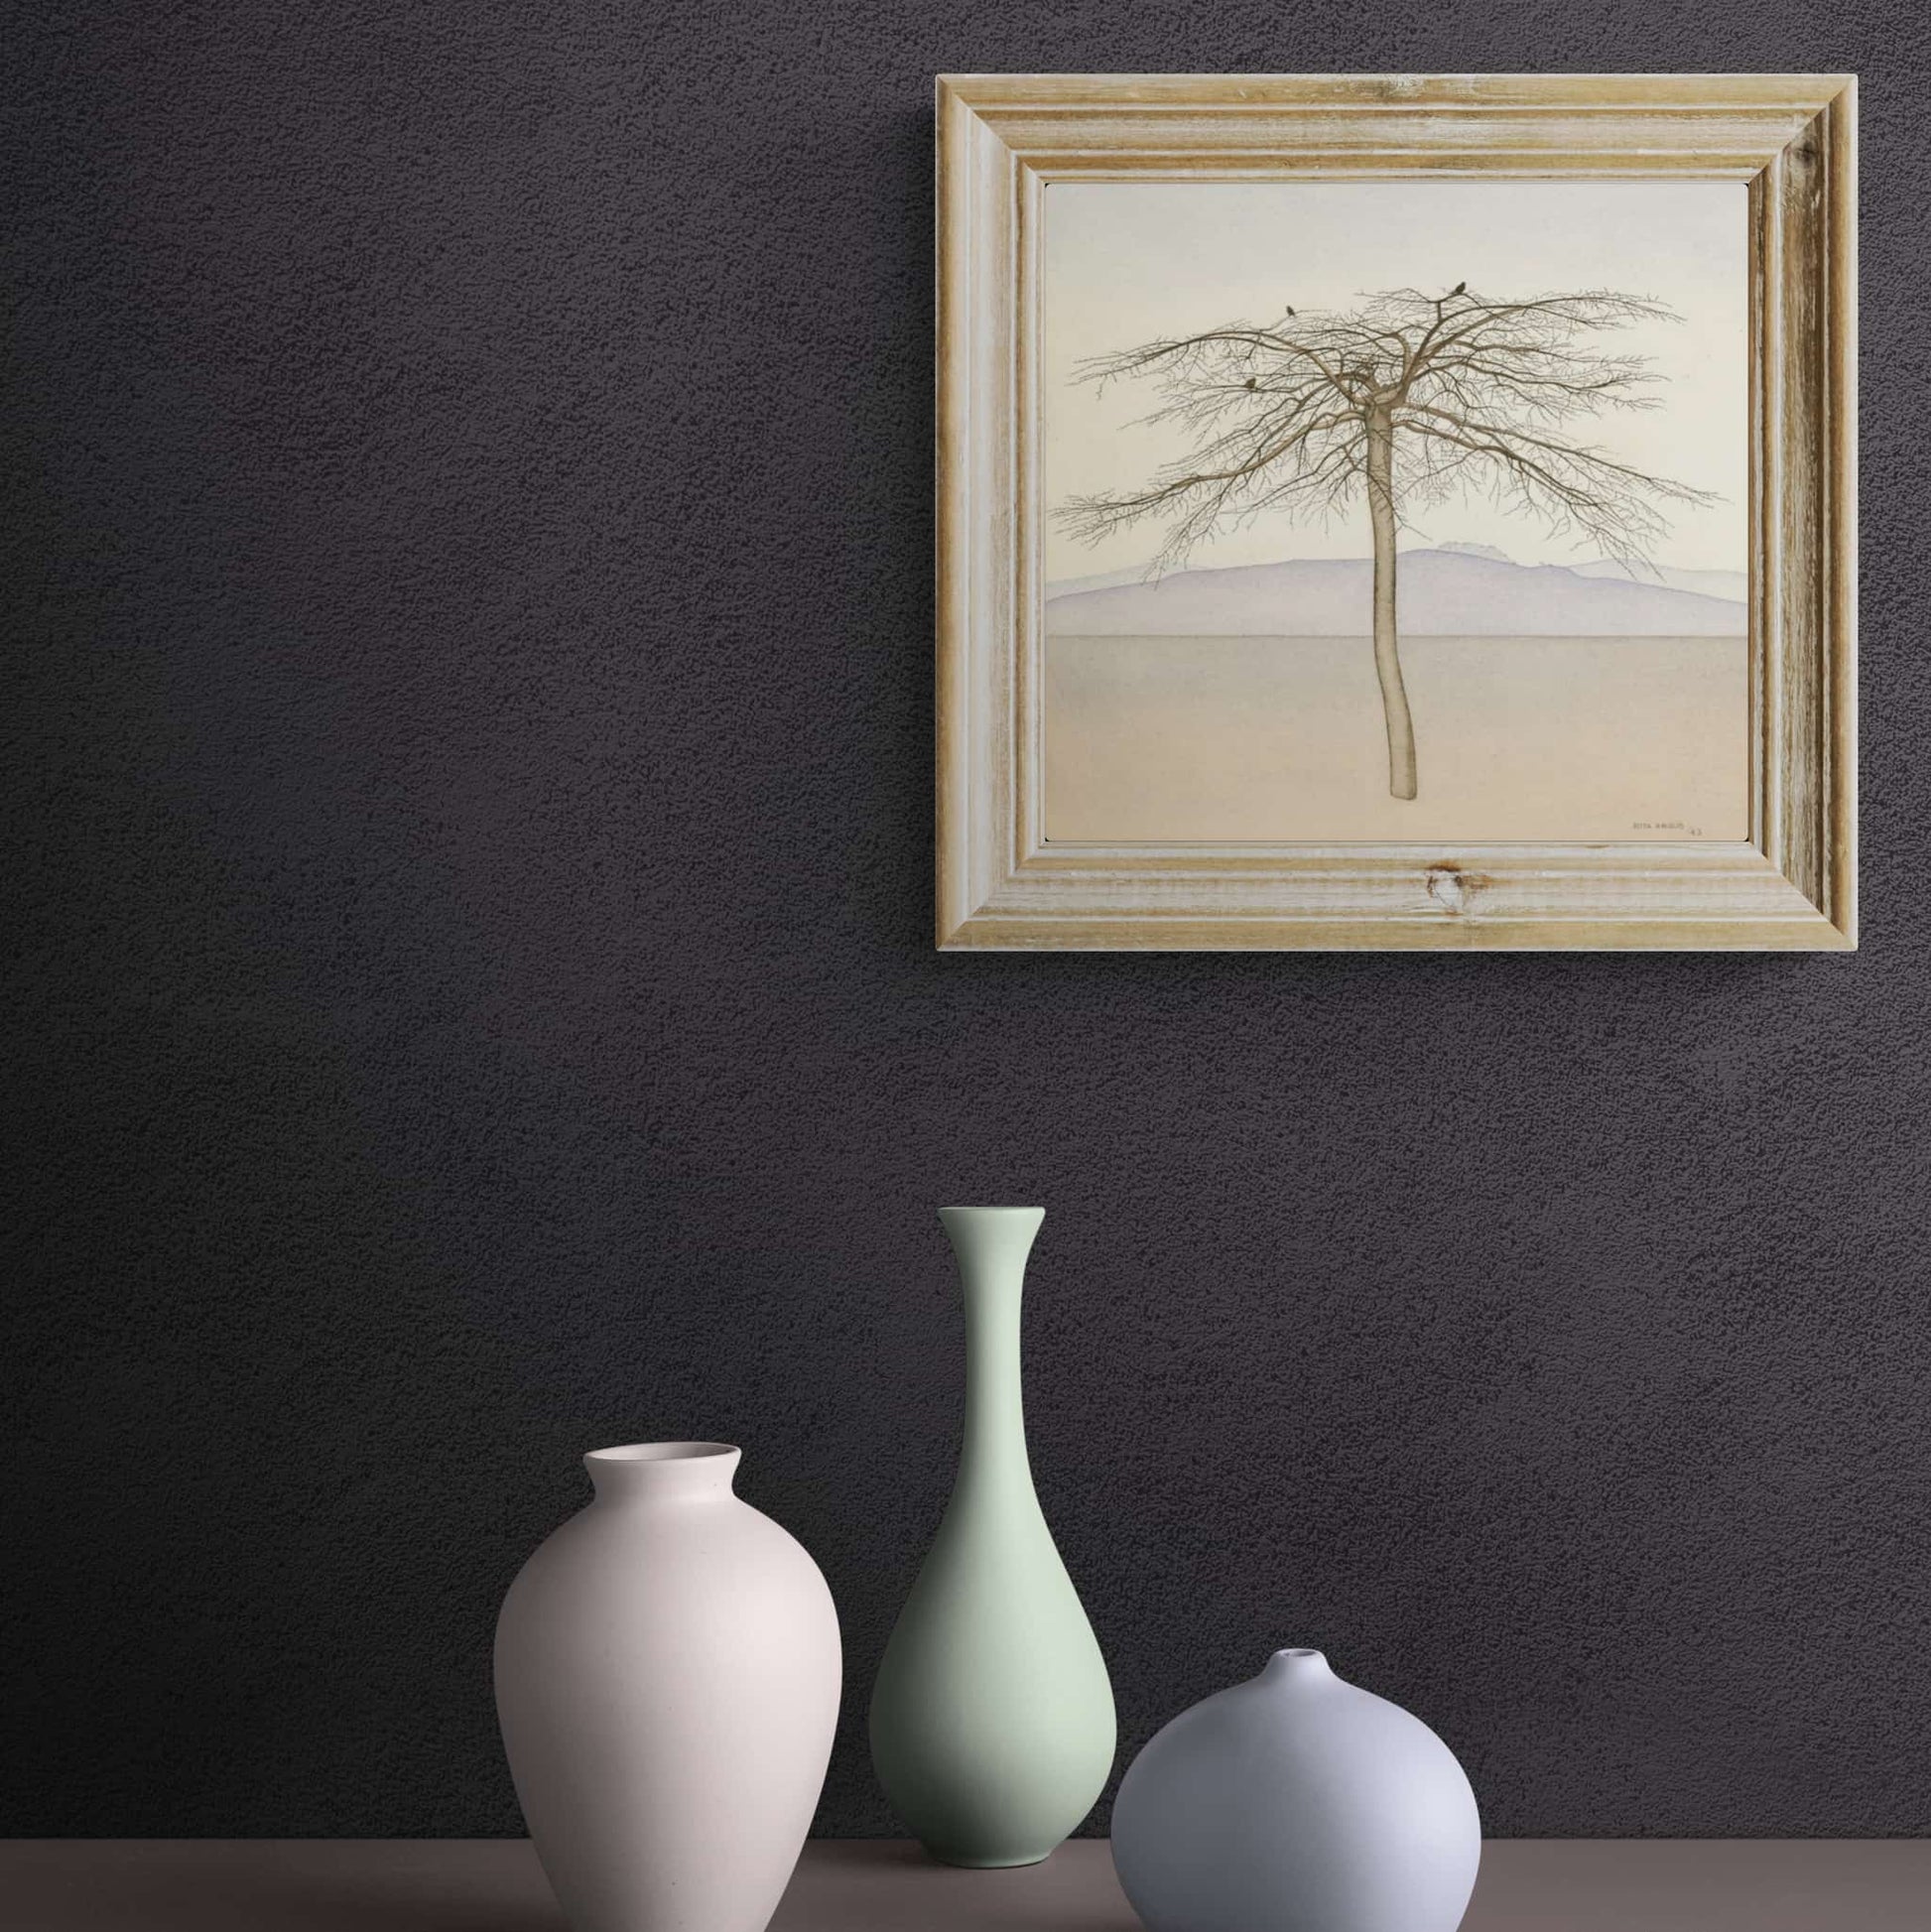 Framed print of a leafless tree with birds